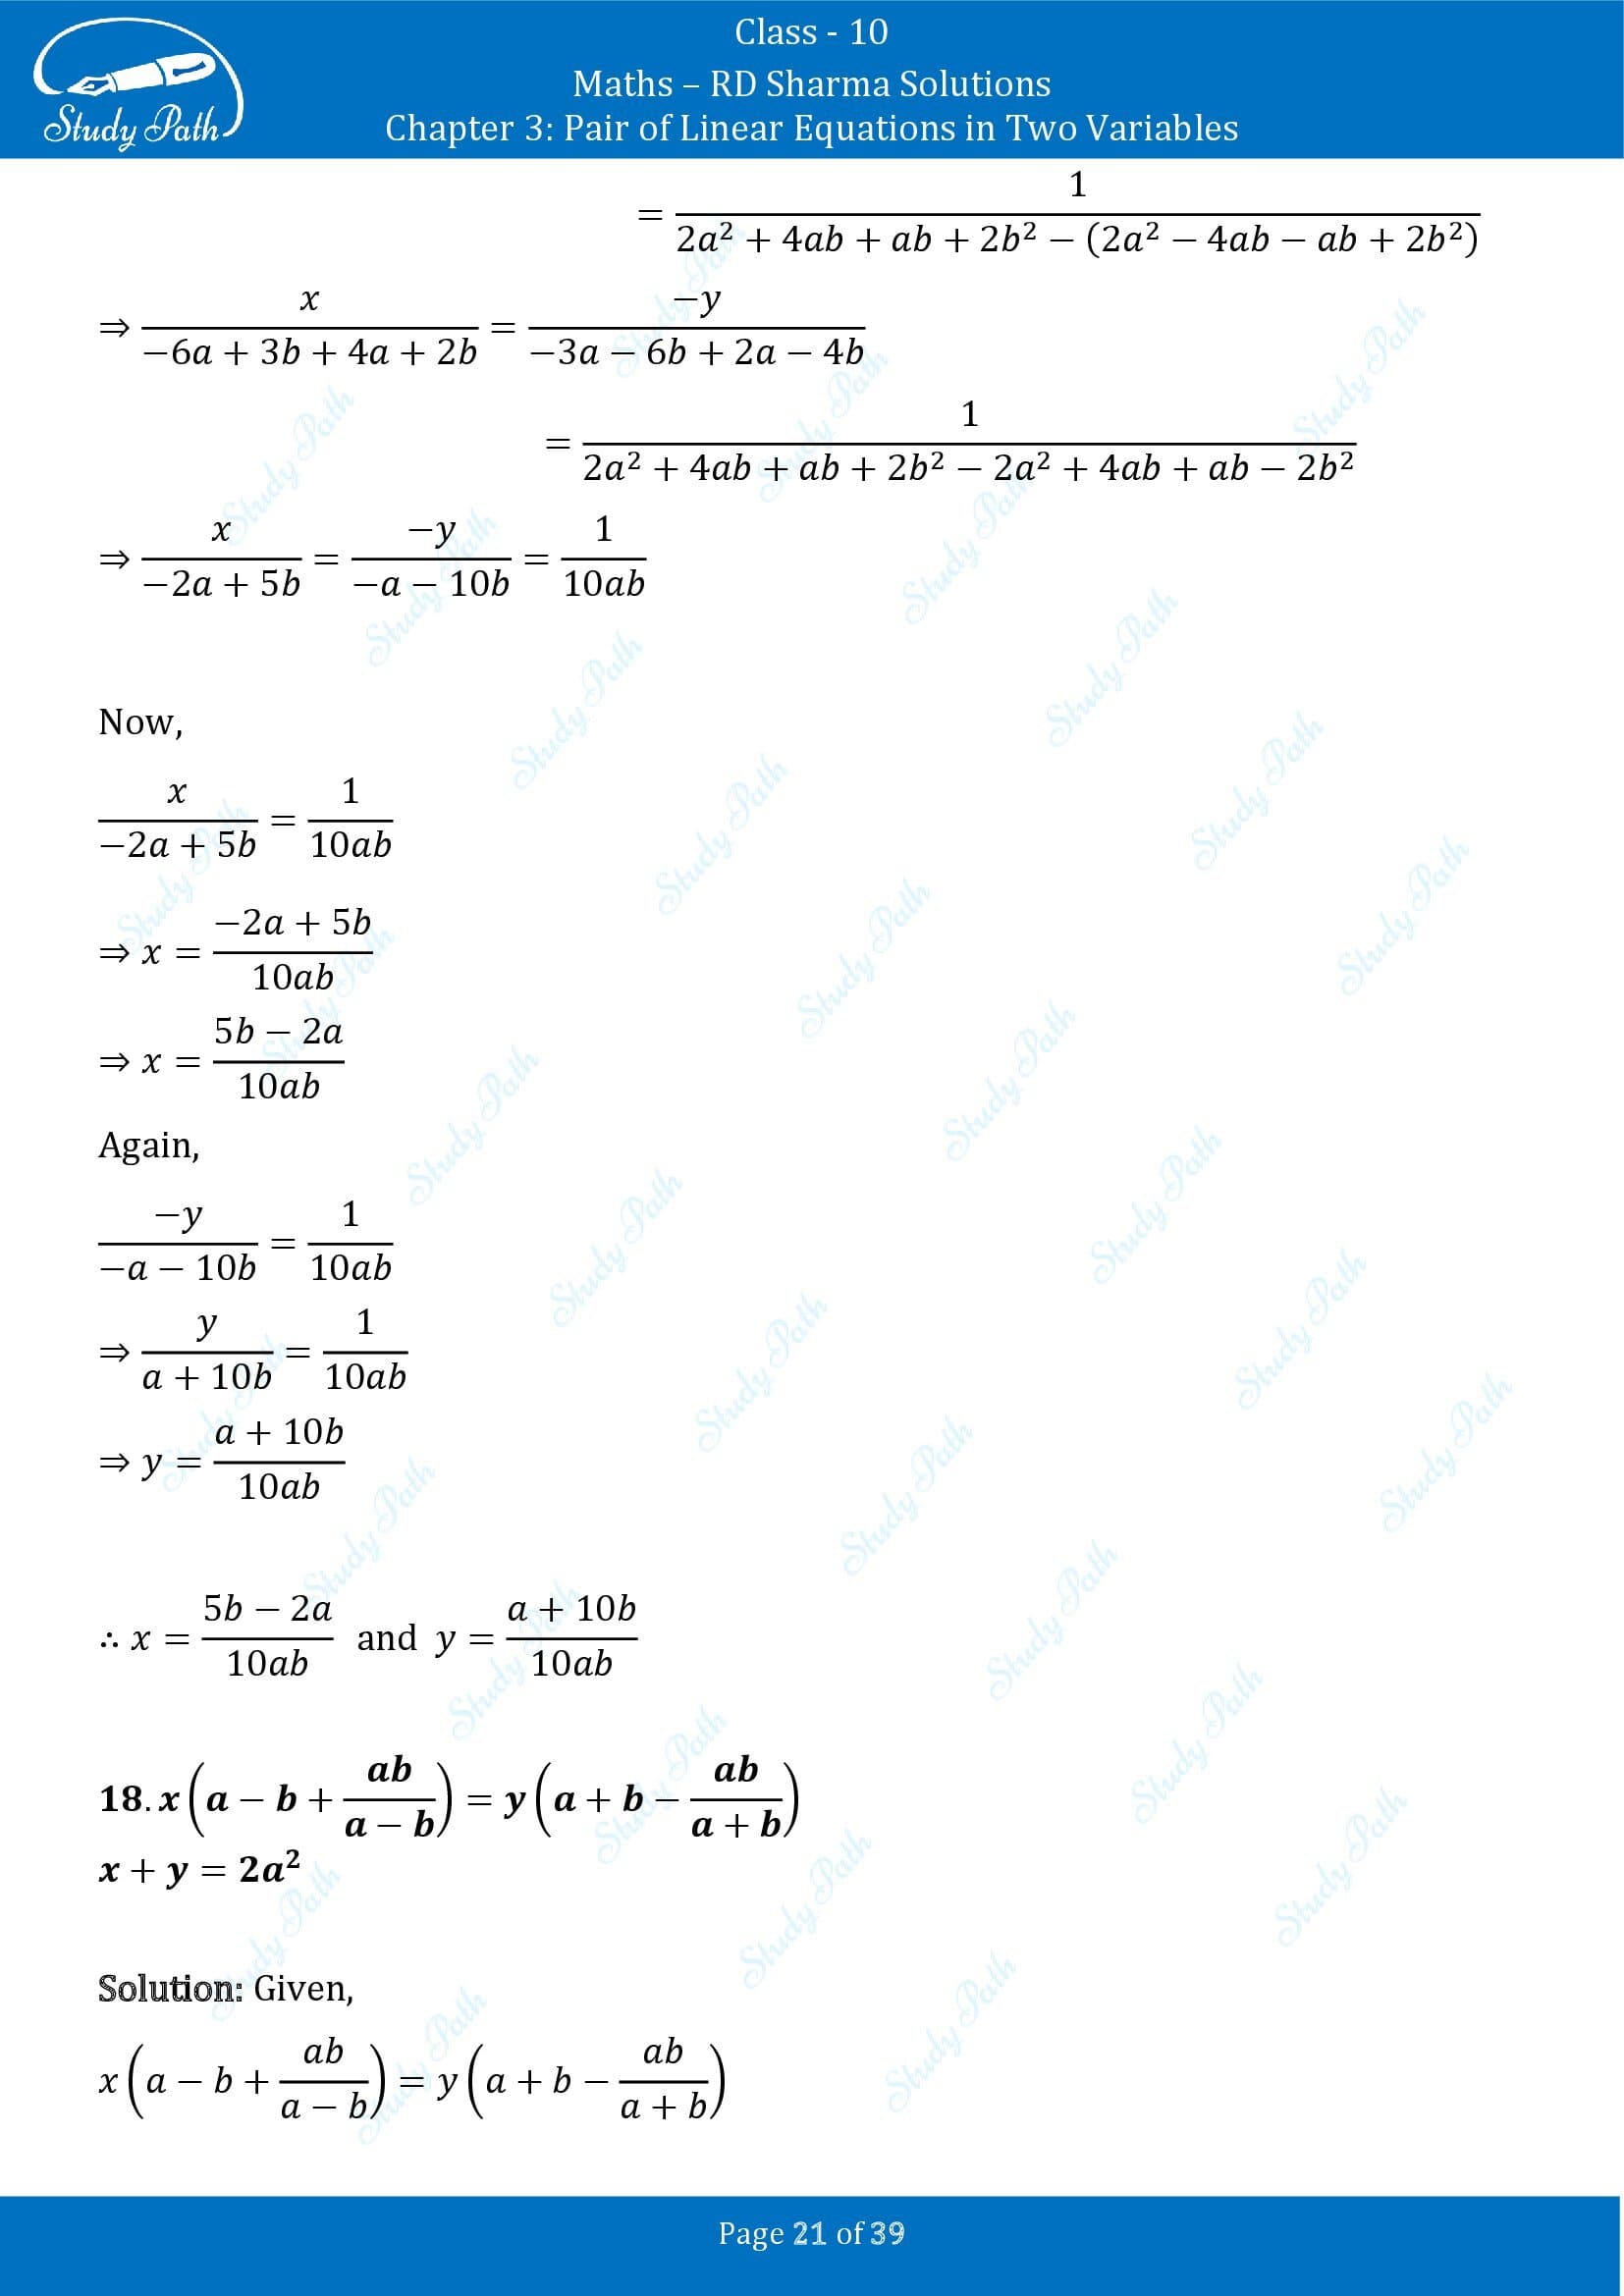 RD Sharma Solutions Class 10 Chapter 3 Pair of Linear Equations in Two Variables Exercise 3.4 00021